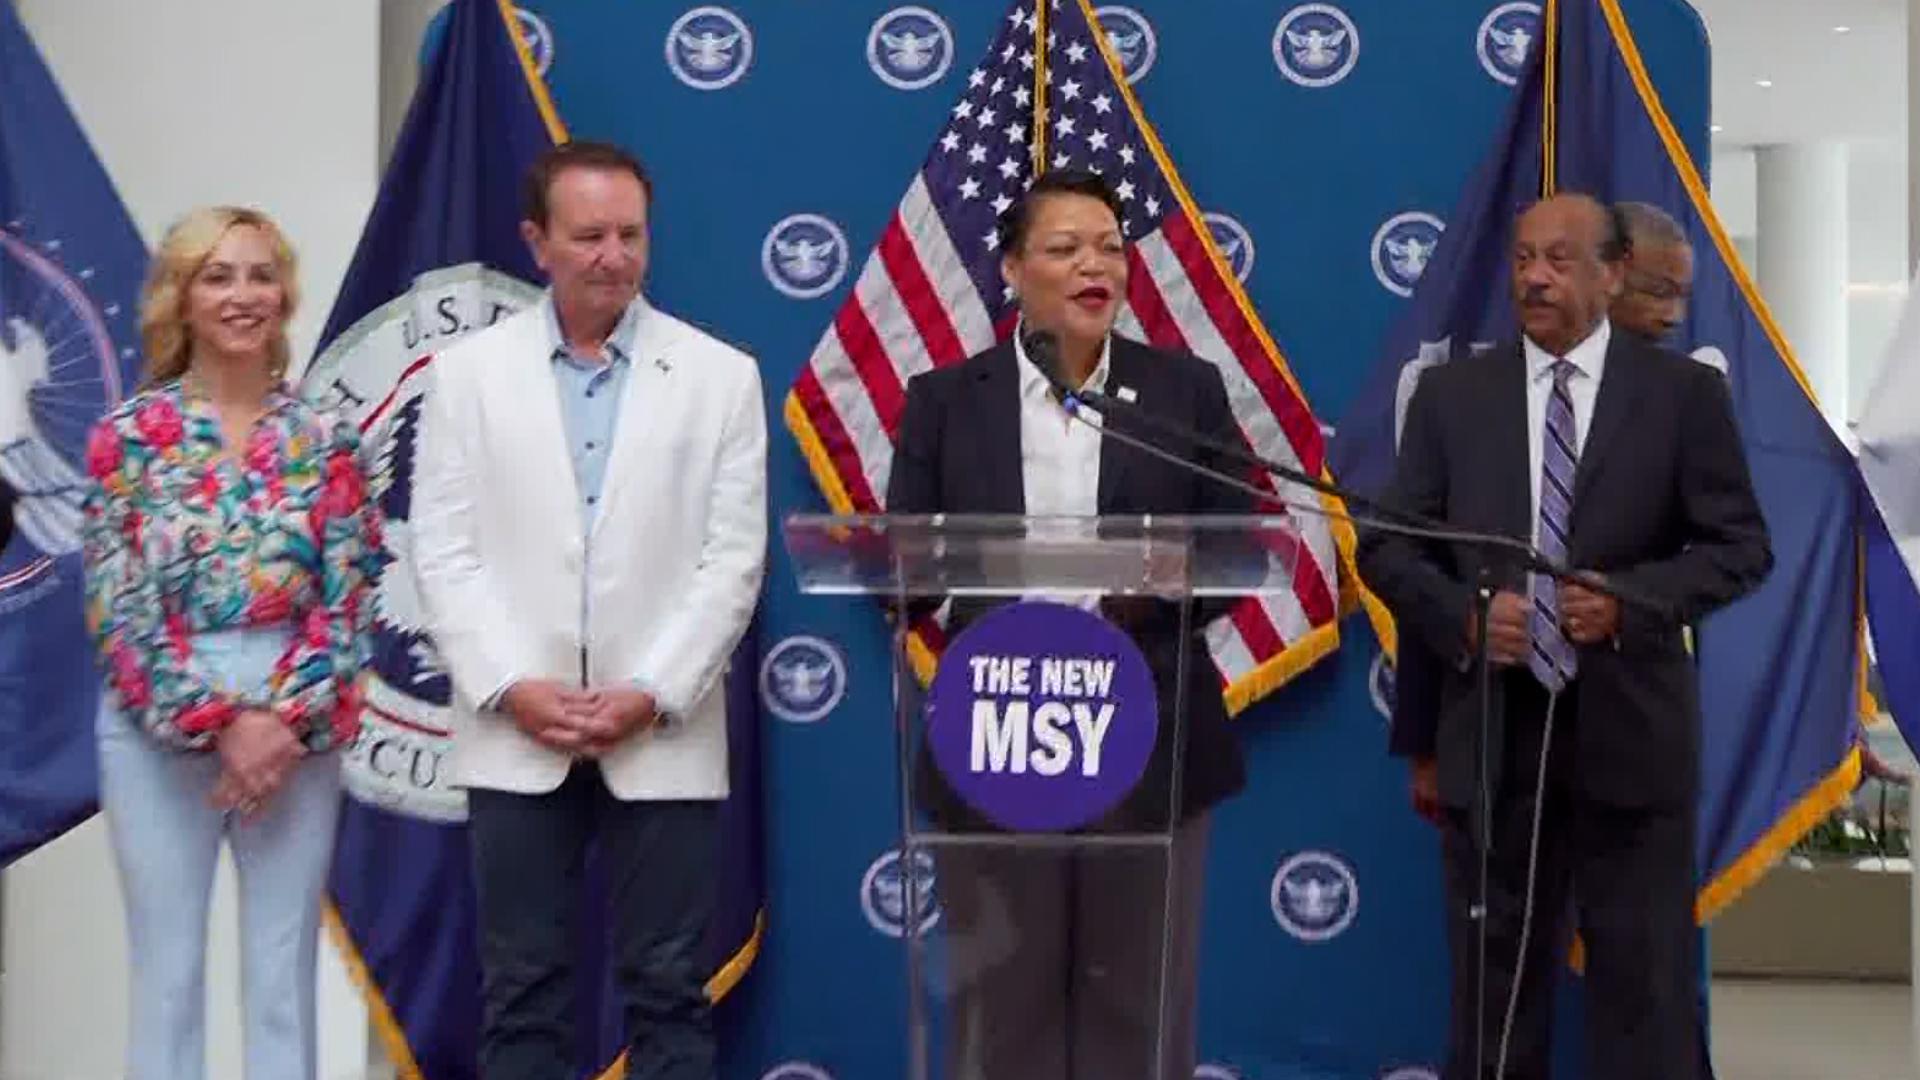 Louisiana Governor Jeff Landry and New Orleans Mayor LaToya Cantrell announce that digital IDs on the LA Wallet app will now be accepted at the MSY Airport.